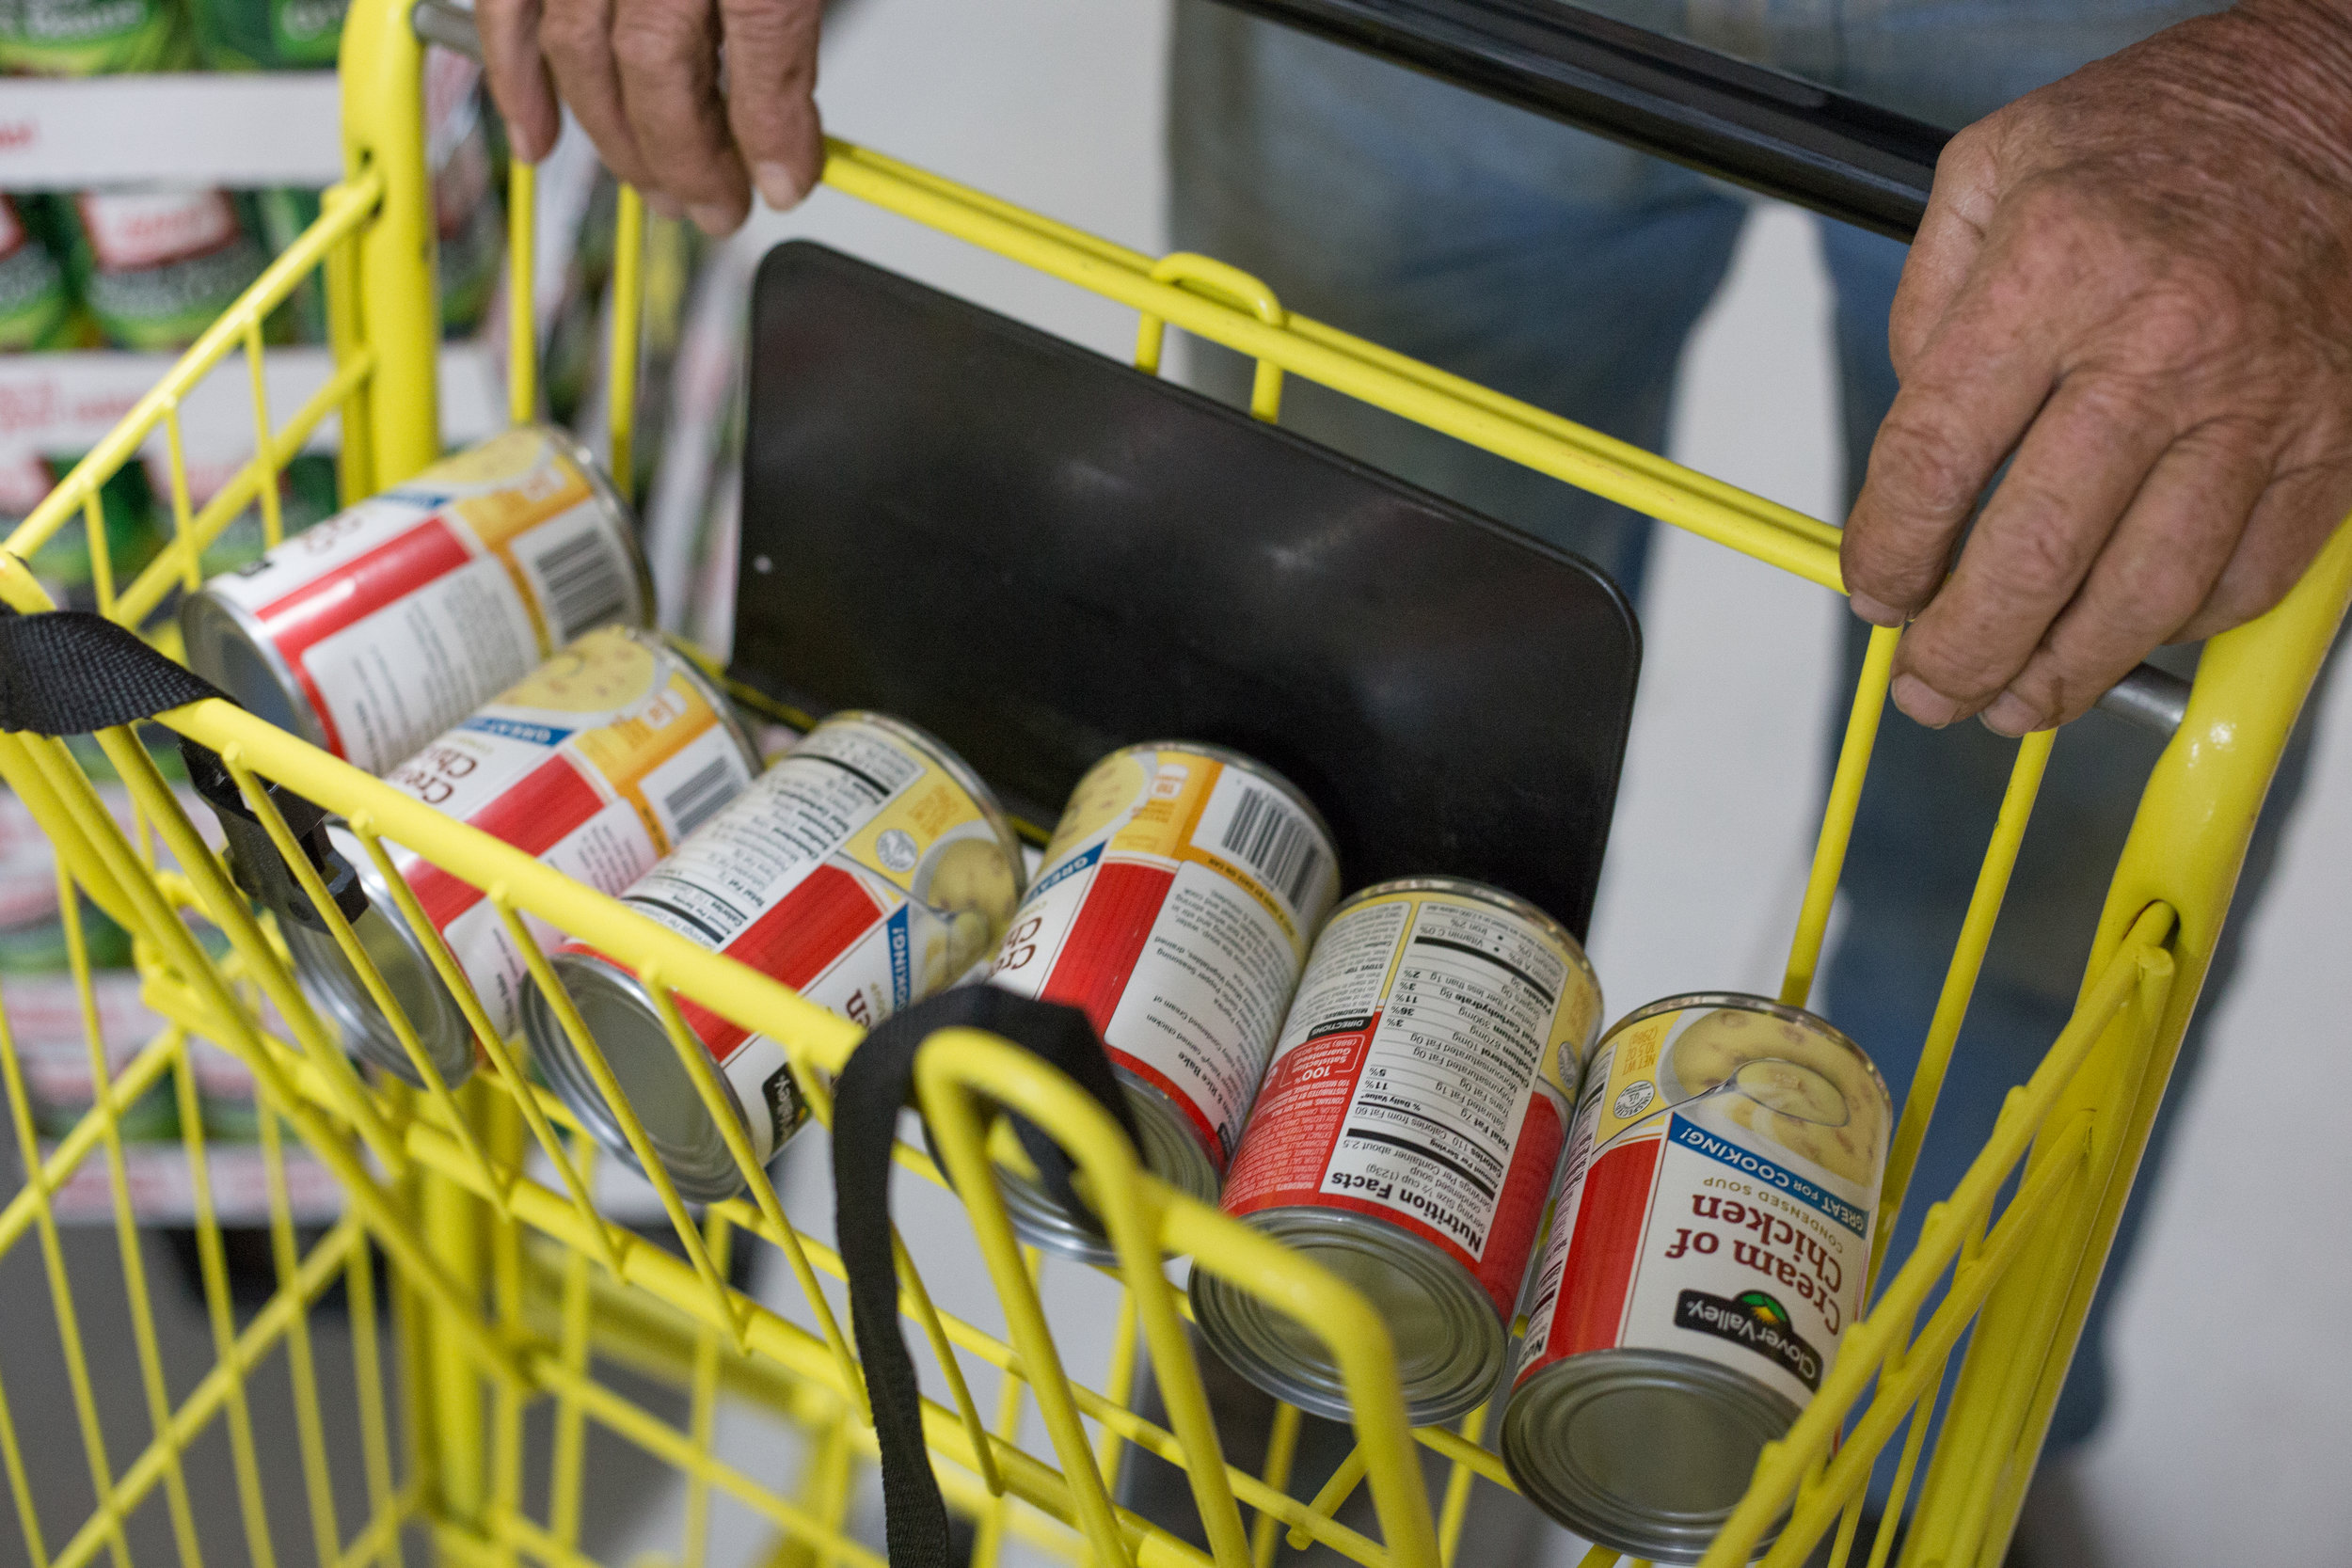  George Beaty of Evensville, Tenn. fills his shopping cart with cream of chicken soup for his neighbor who was not feeling well at Dollar General in Evensville, Tenn. Thursday, Nov. 16 2017. Store manager Justin Ray said that although the store does 